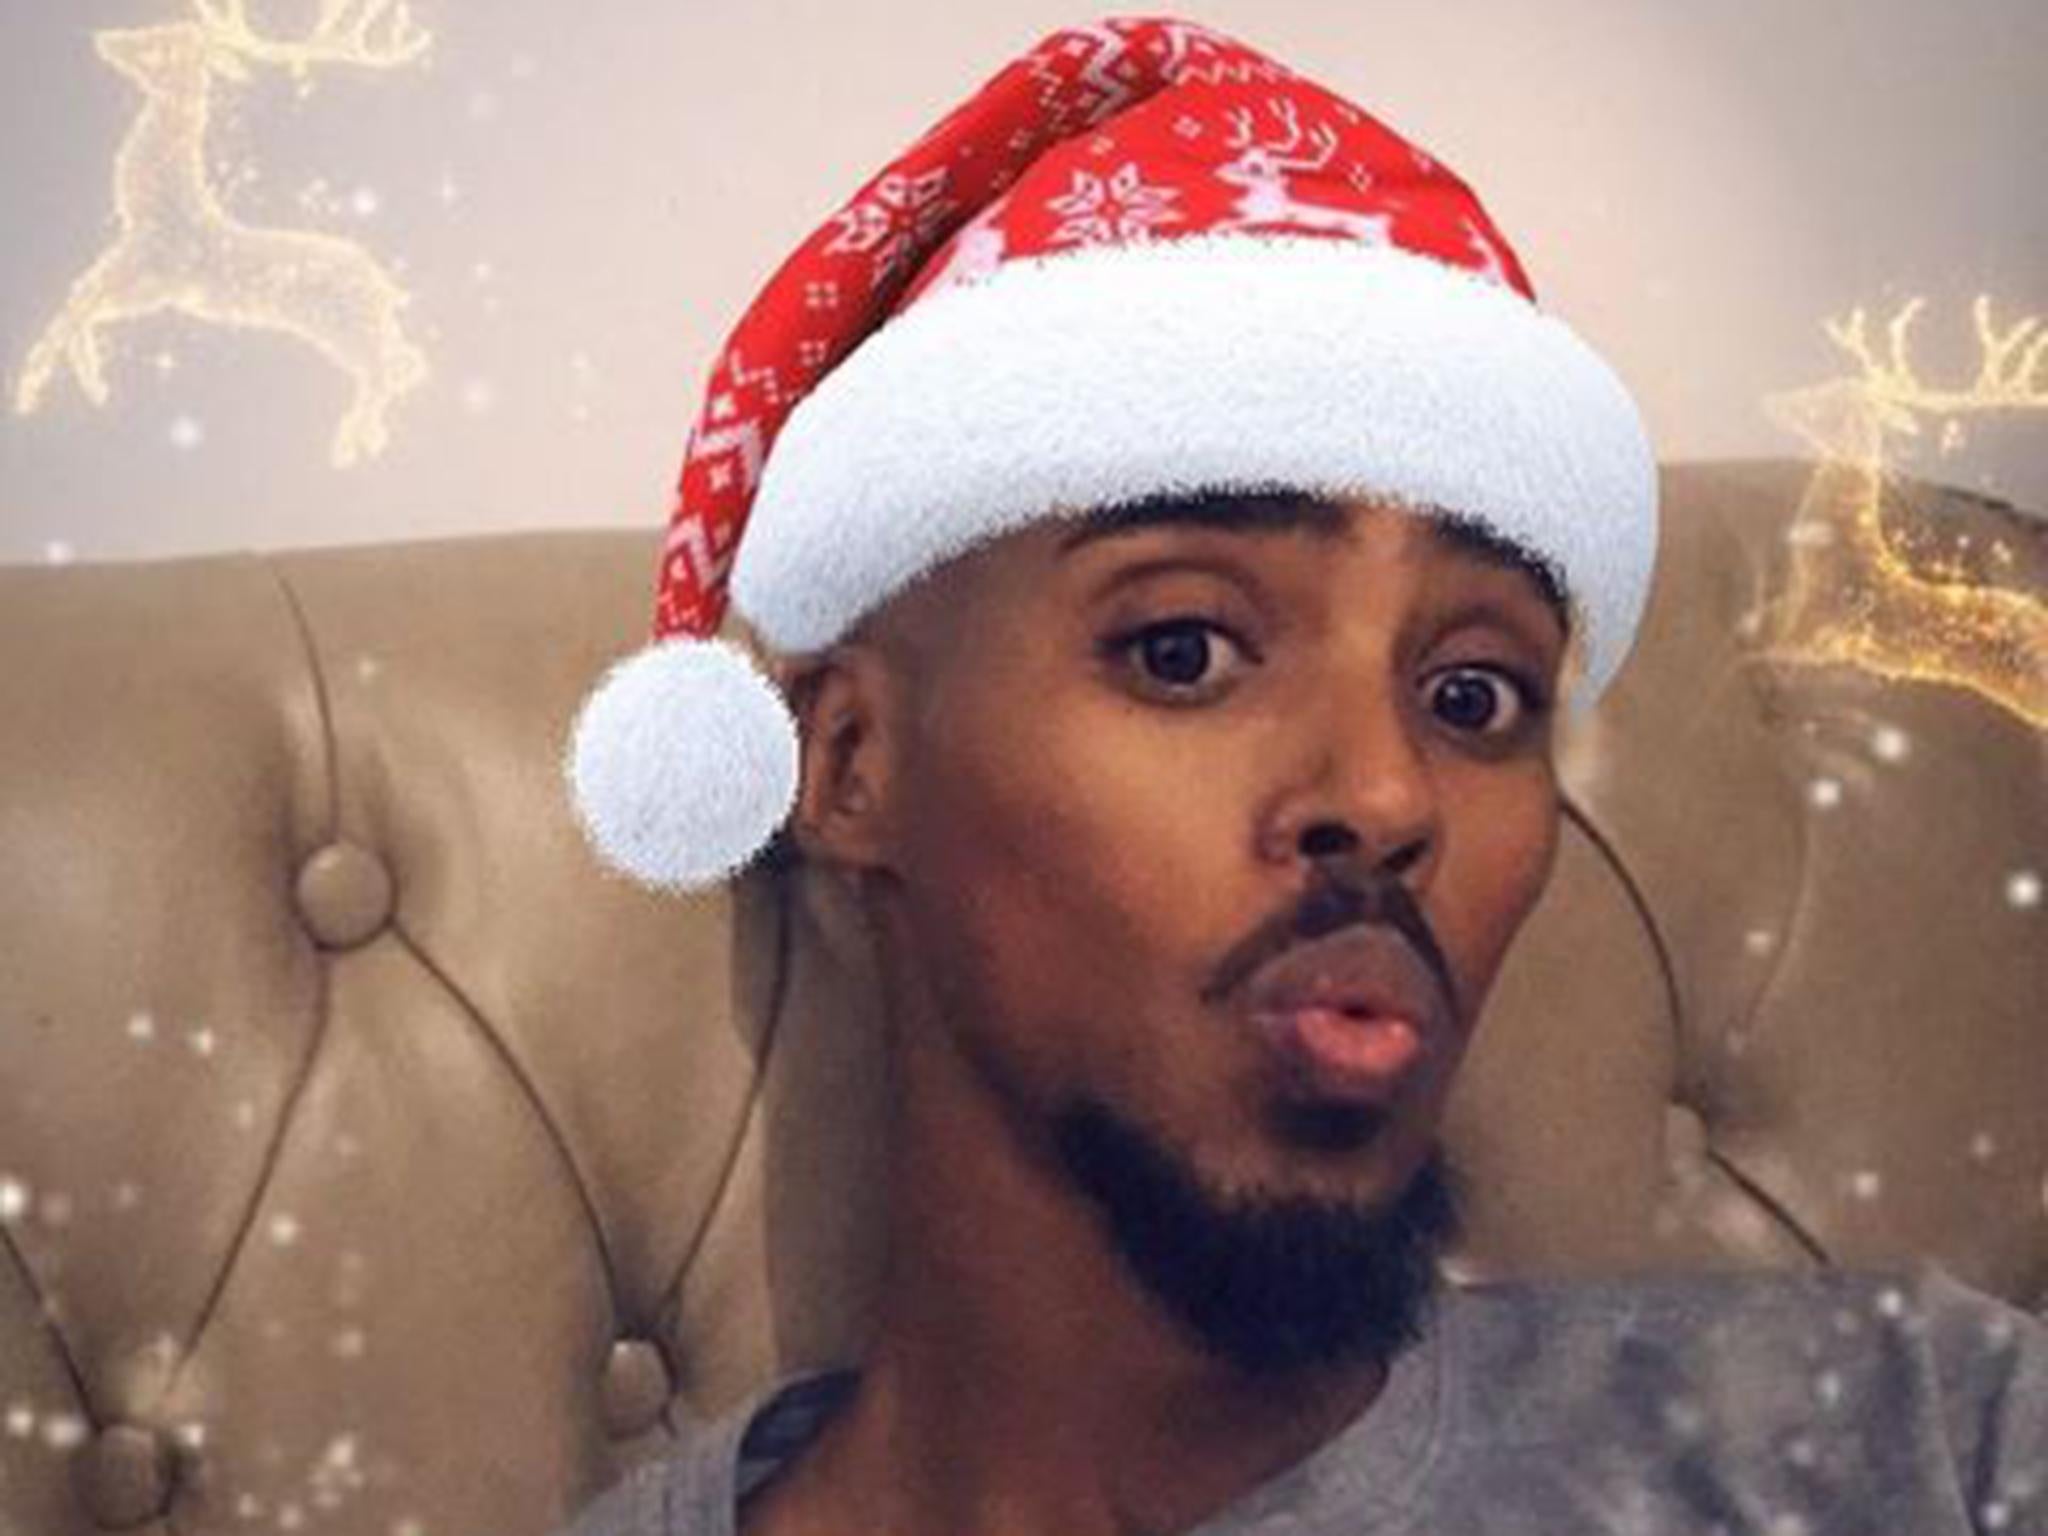 Mo Farah posted a Merry Christmas message on social media